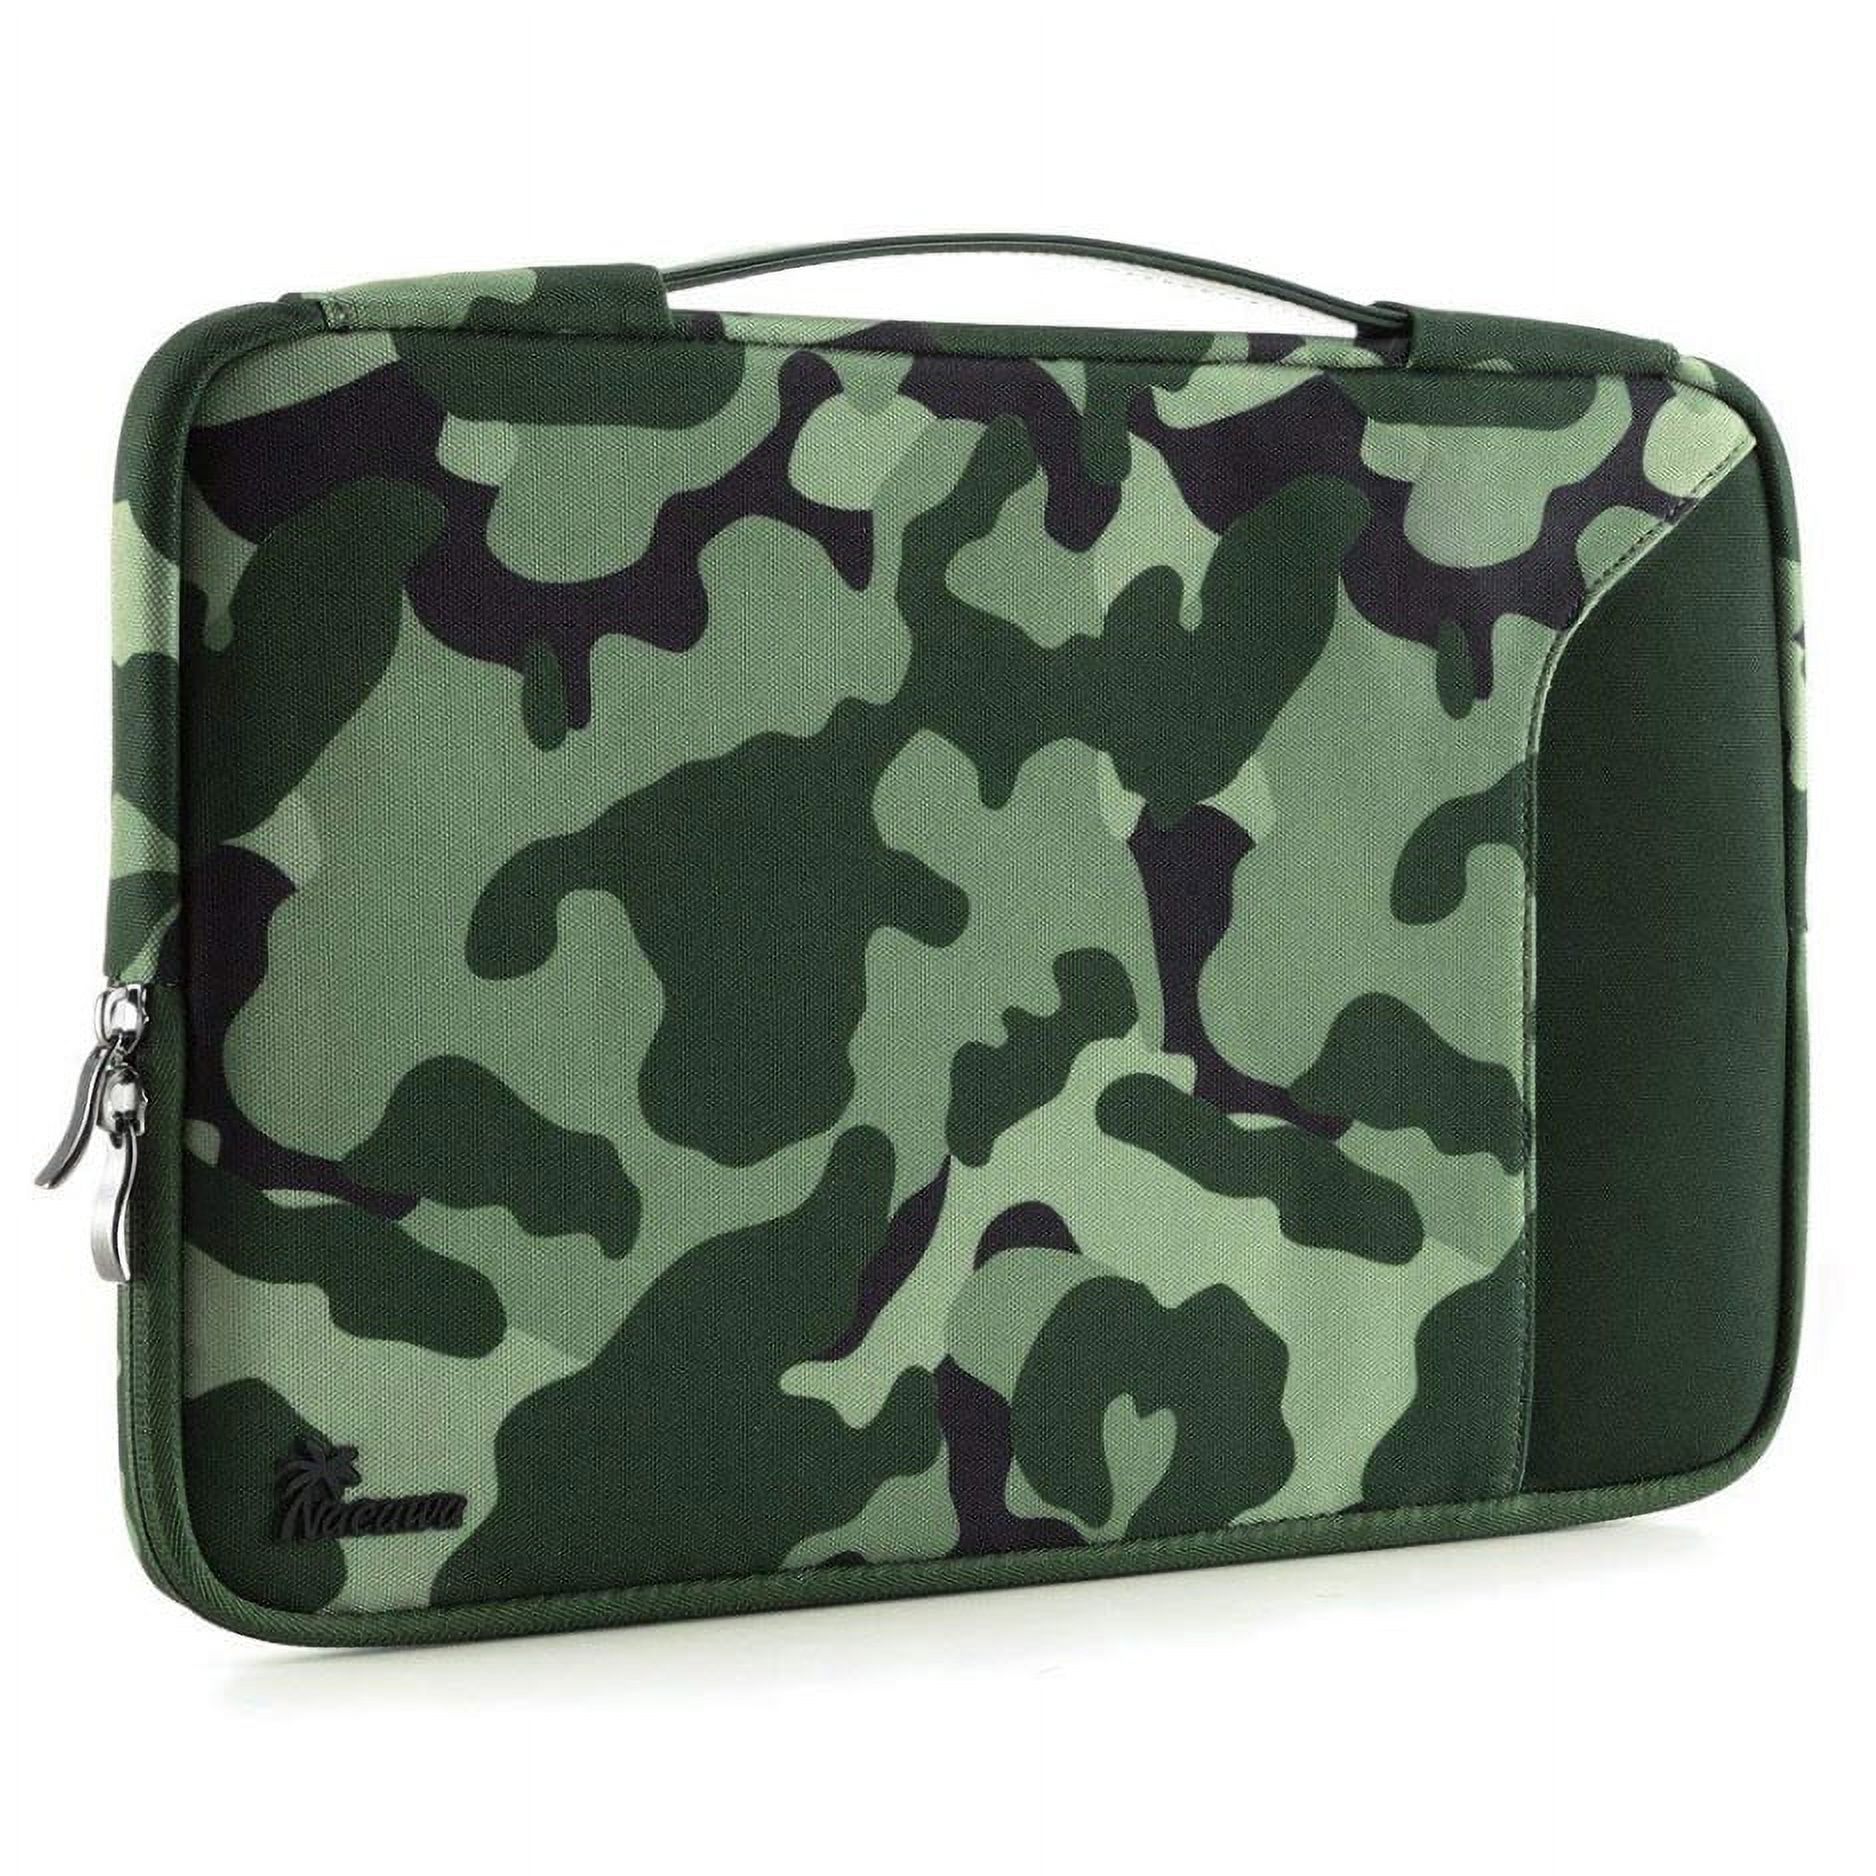 MacBook Air 13 Inch Case 2018 Release A1932, Nacuwa 360° Protective Sleeve for 2018 MacBook Air 13-inch |13 inch MacBook Pro A1989 A1706 A1708 - Shockproof,Spill-Resistant Handbag Case(Camouflage) - image 1 of 7